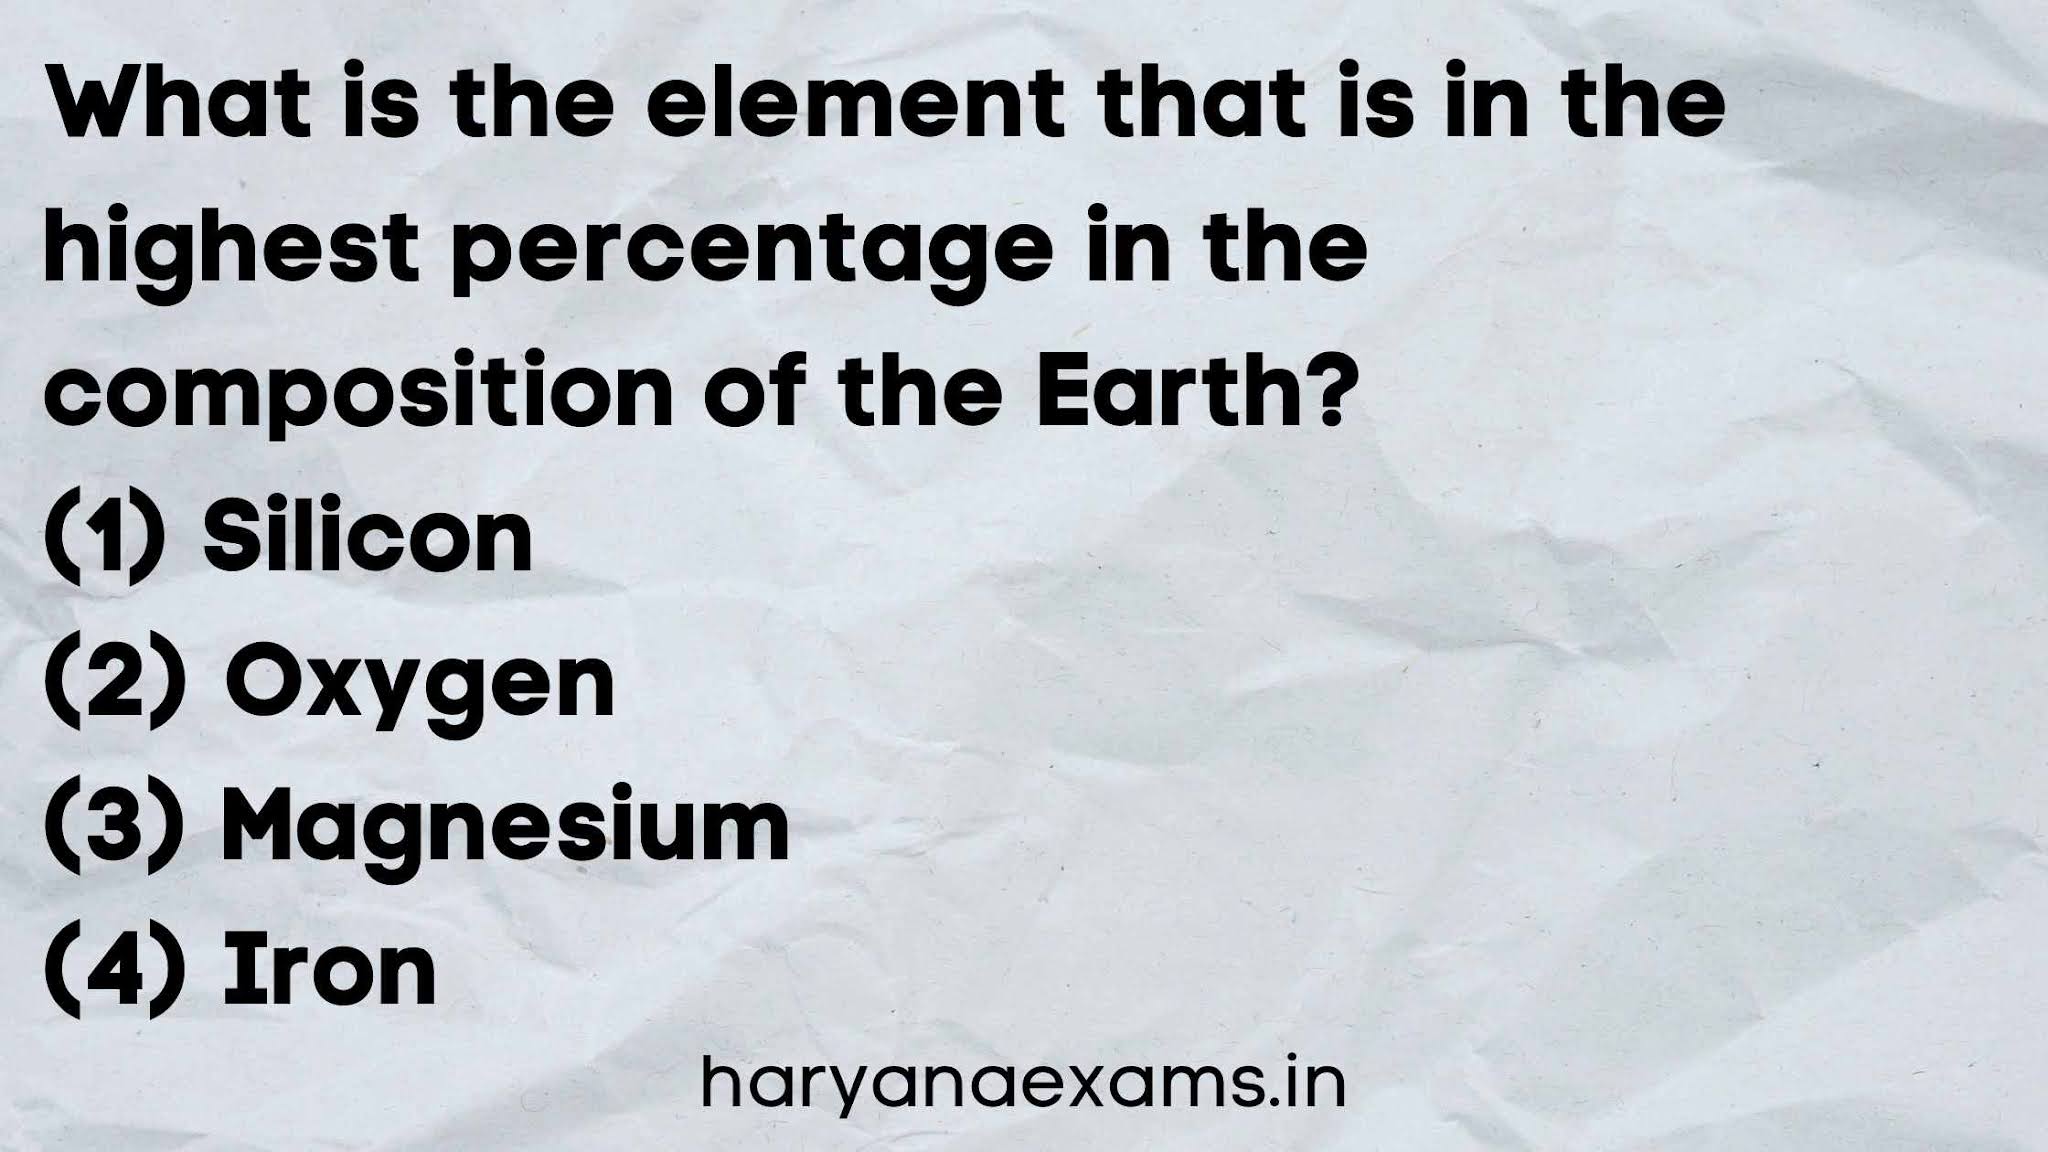 What is the element that is in the highest percentage in the composition of the Earth?   (1) Silicon   (2) Oxygen   (3) Magnesium   (4) Iron